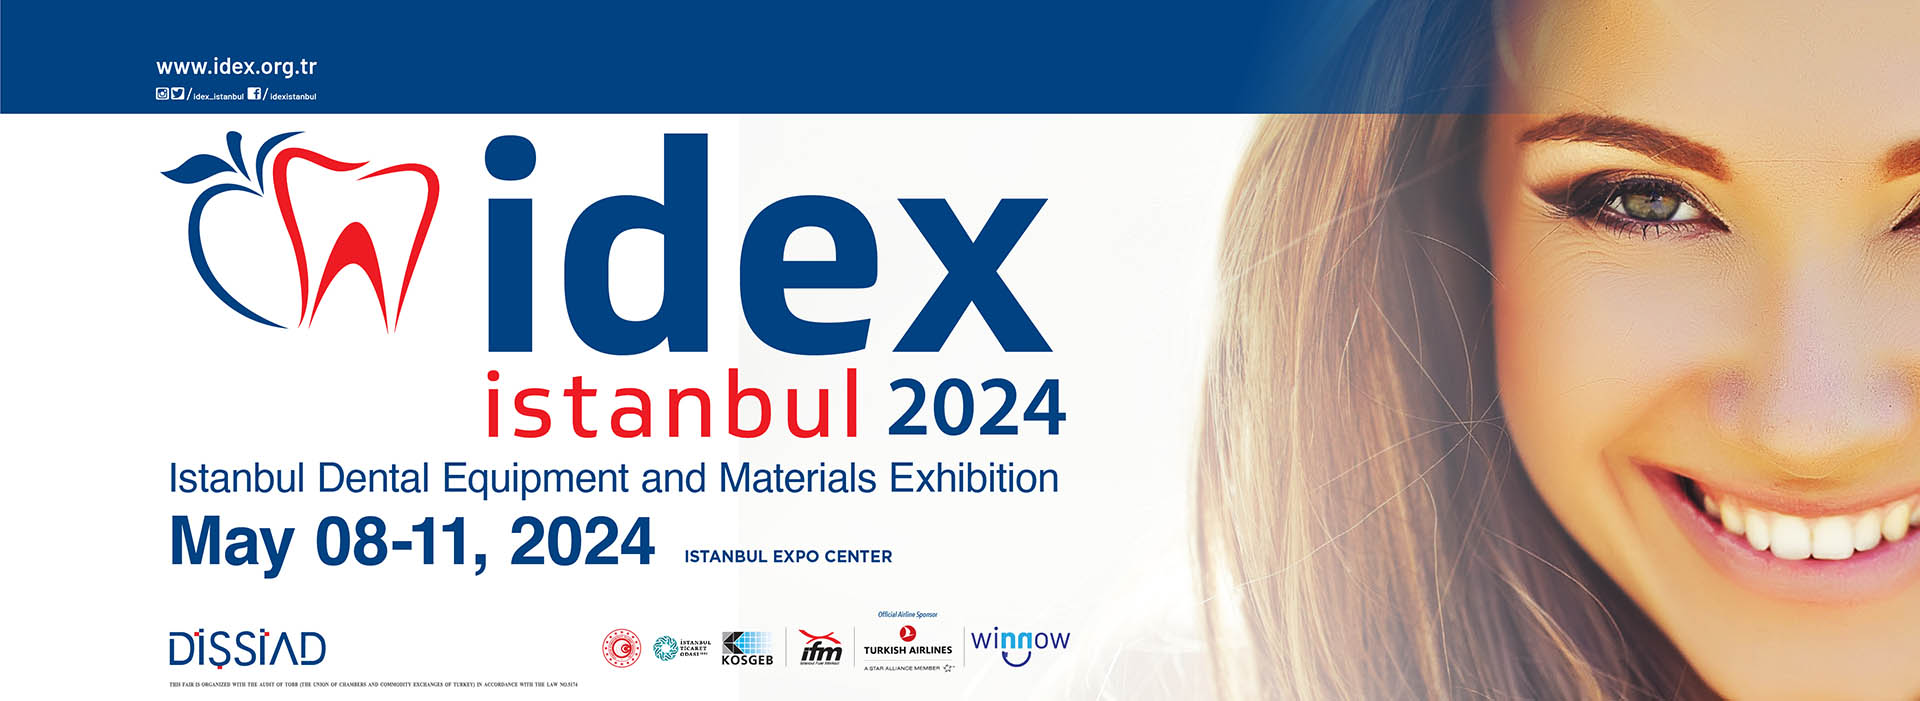 IDEX İstanbul 2024 İstanbul Dental Equipment and Materials Exhibition